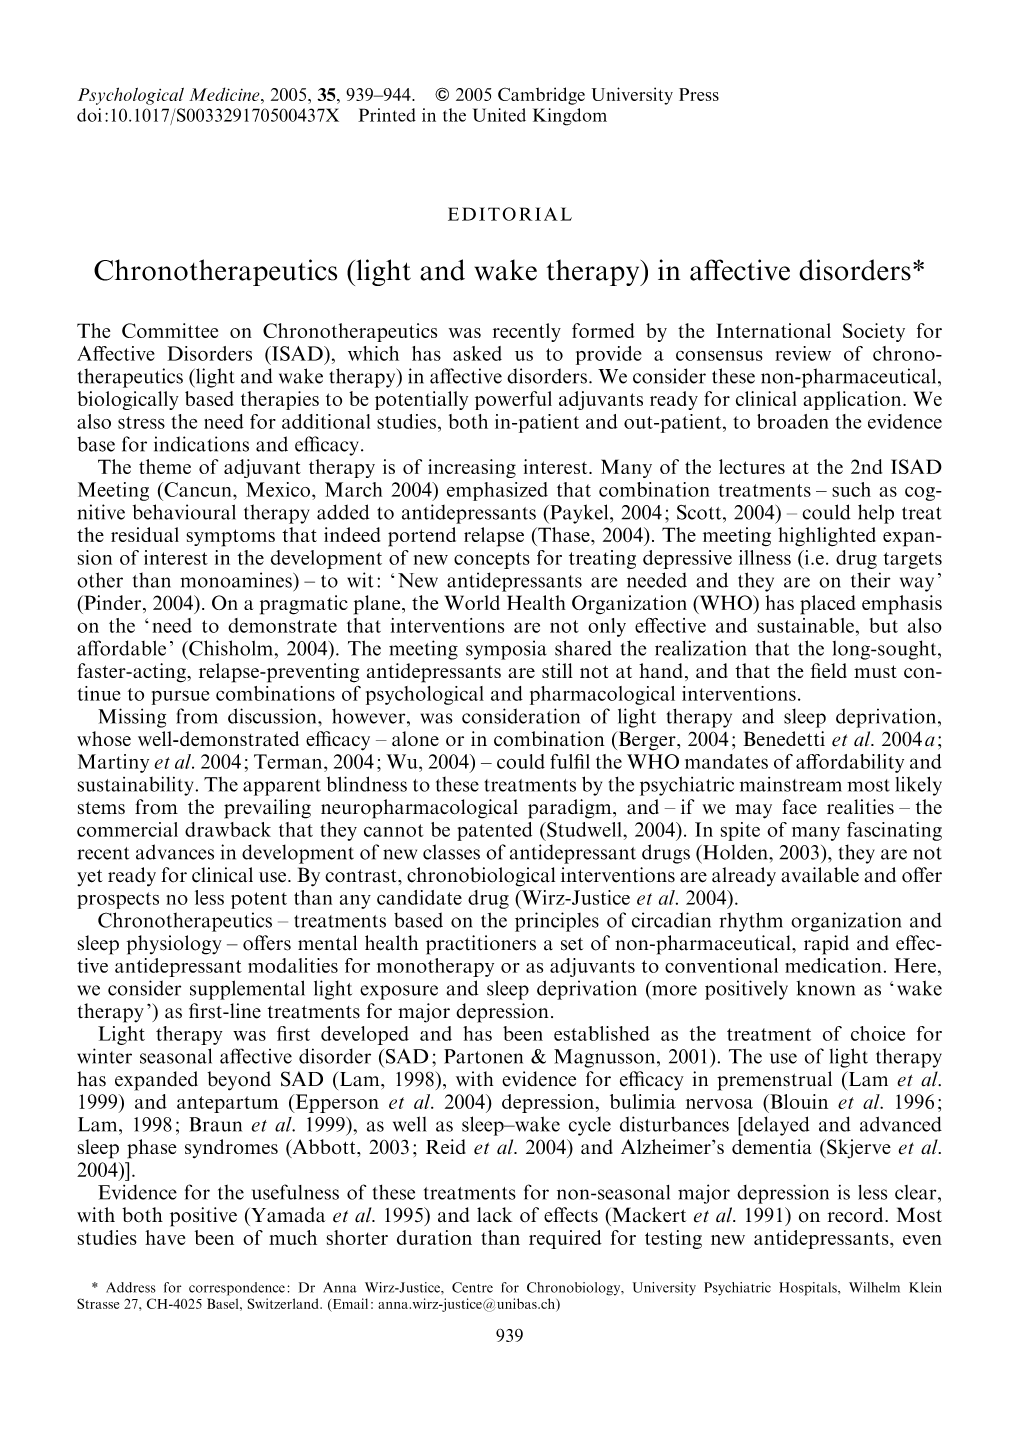 Light and Wake Therapy) in Aﬀective Disorders*